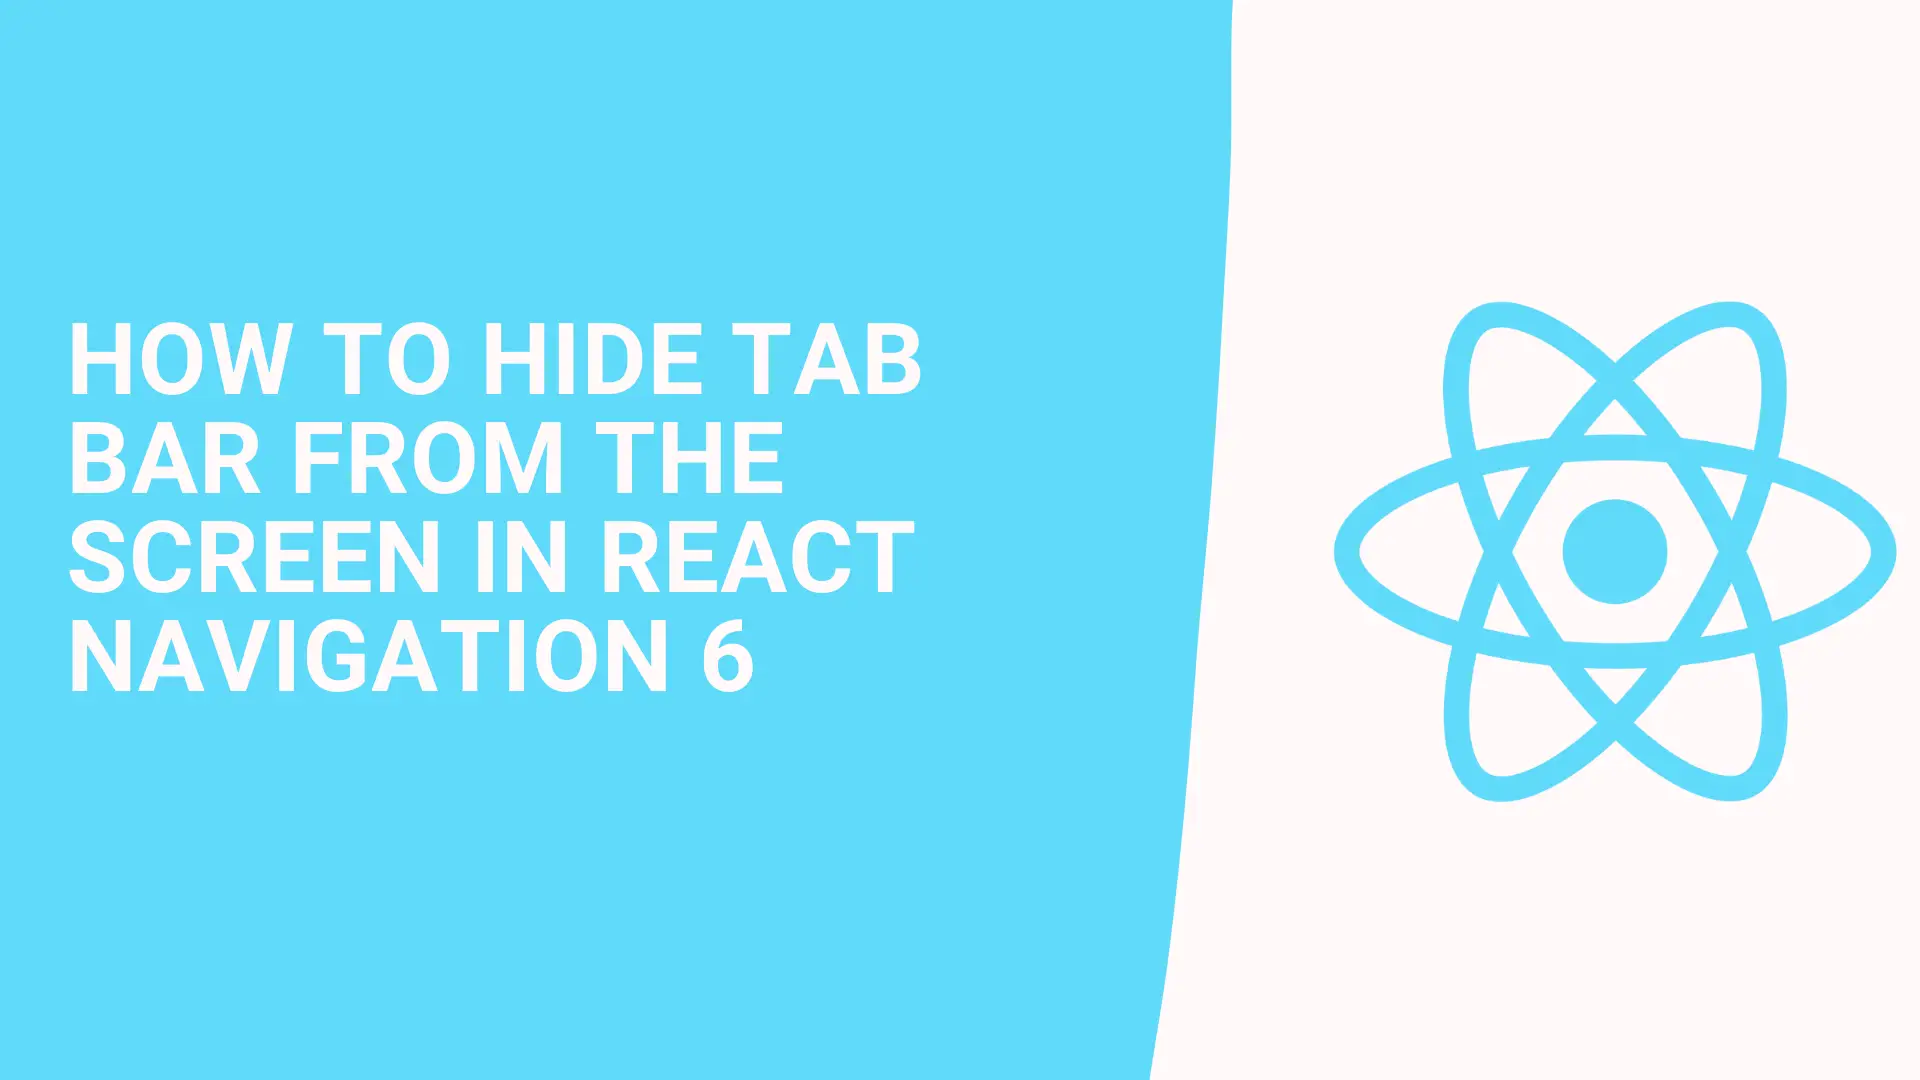 How to hide Tab Bar from the screen in React Navigation 6